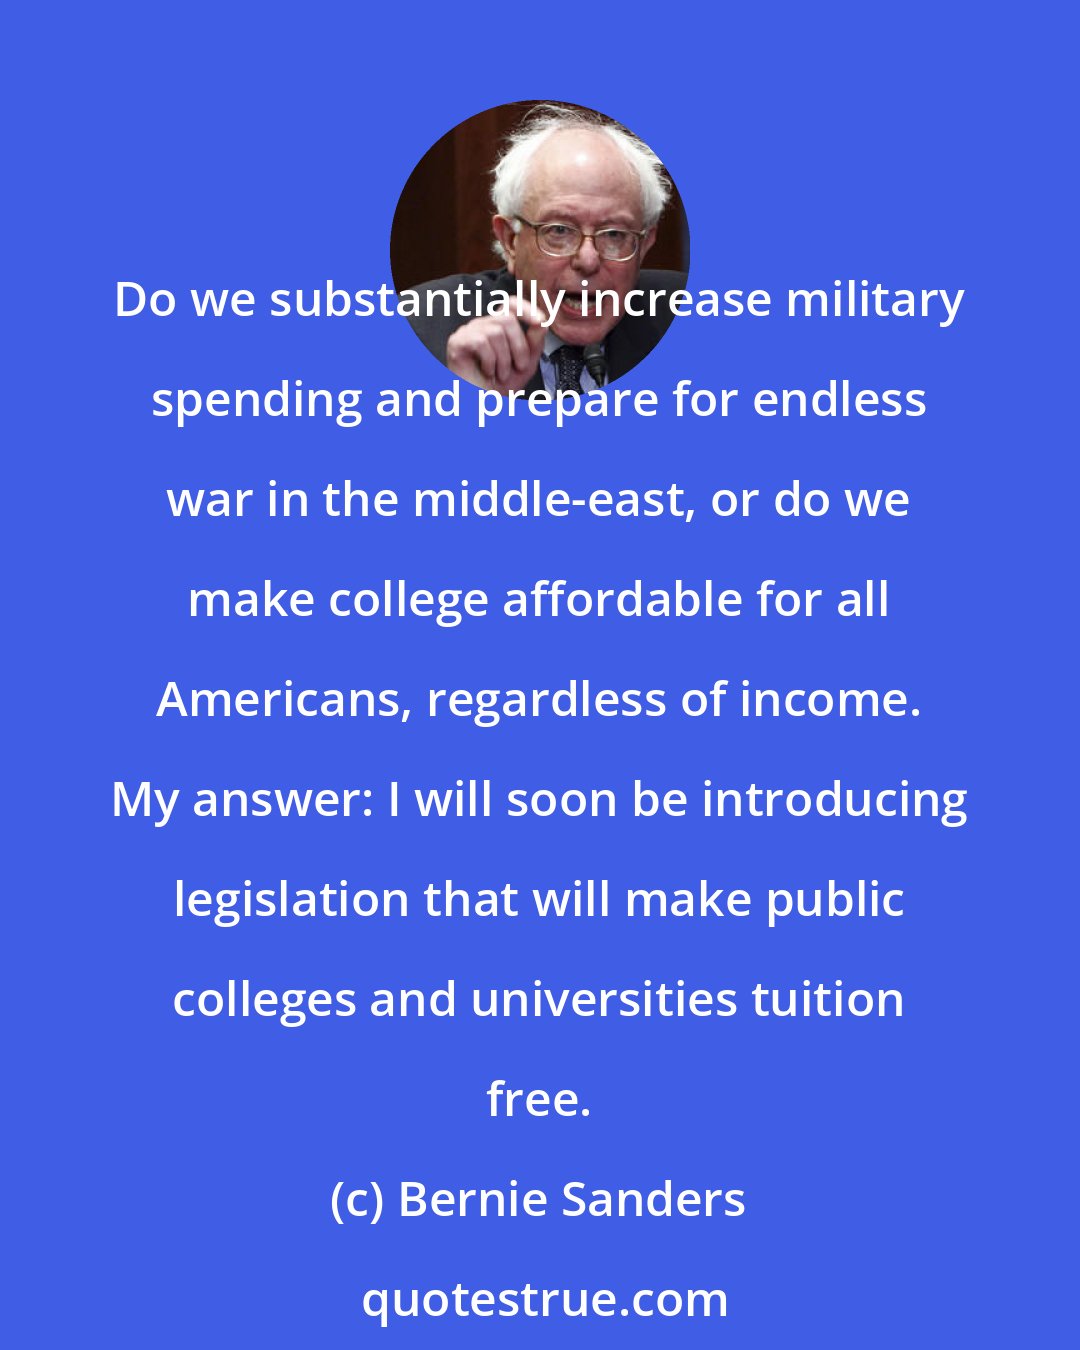 Bernie Sanders: Do we substantially increase military spending and prepare for endless war in the middle-east, or do we make college affordable for all Americans, regardless of income. My answer: I will soon be introducing legislation that will make public colleges and universities tuition free.